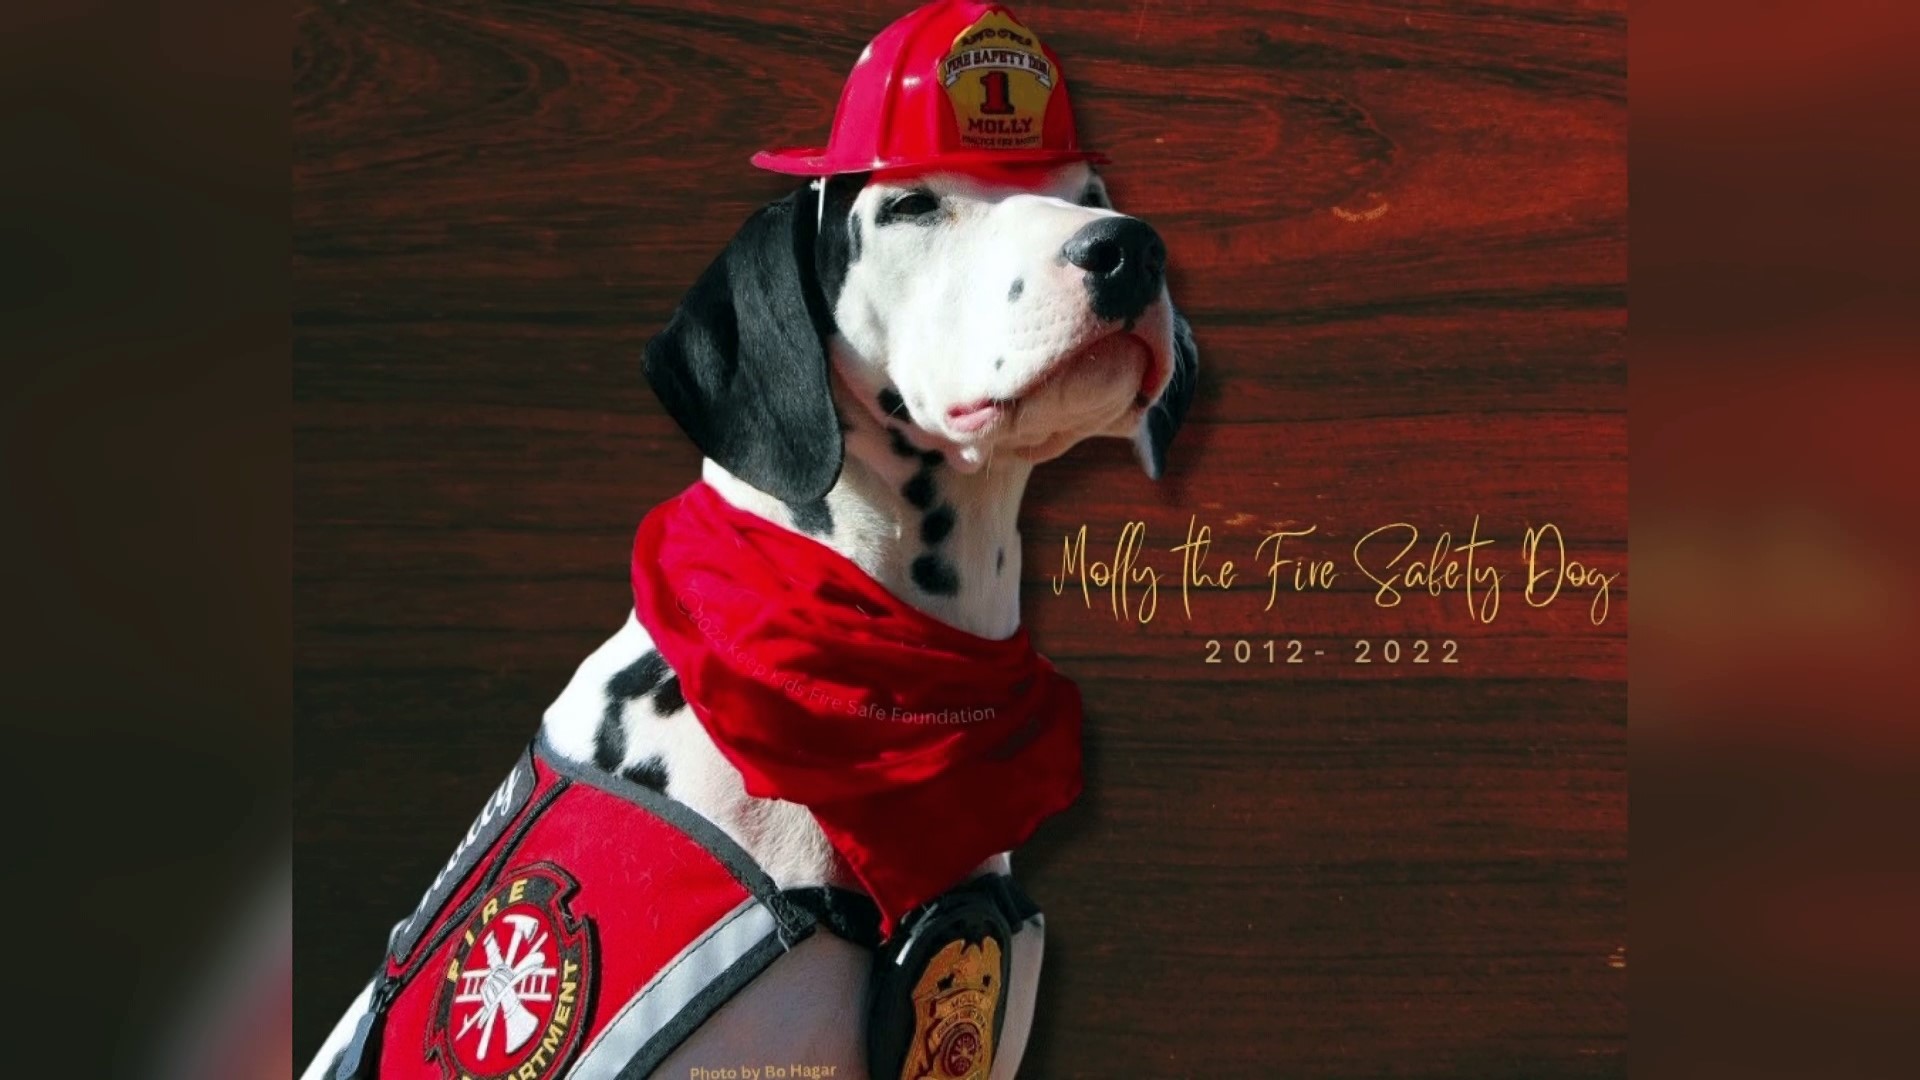 Molly taught thousands of children and adults the importance of fire safety for ten years before passing away Tuesday.